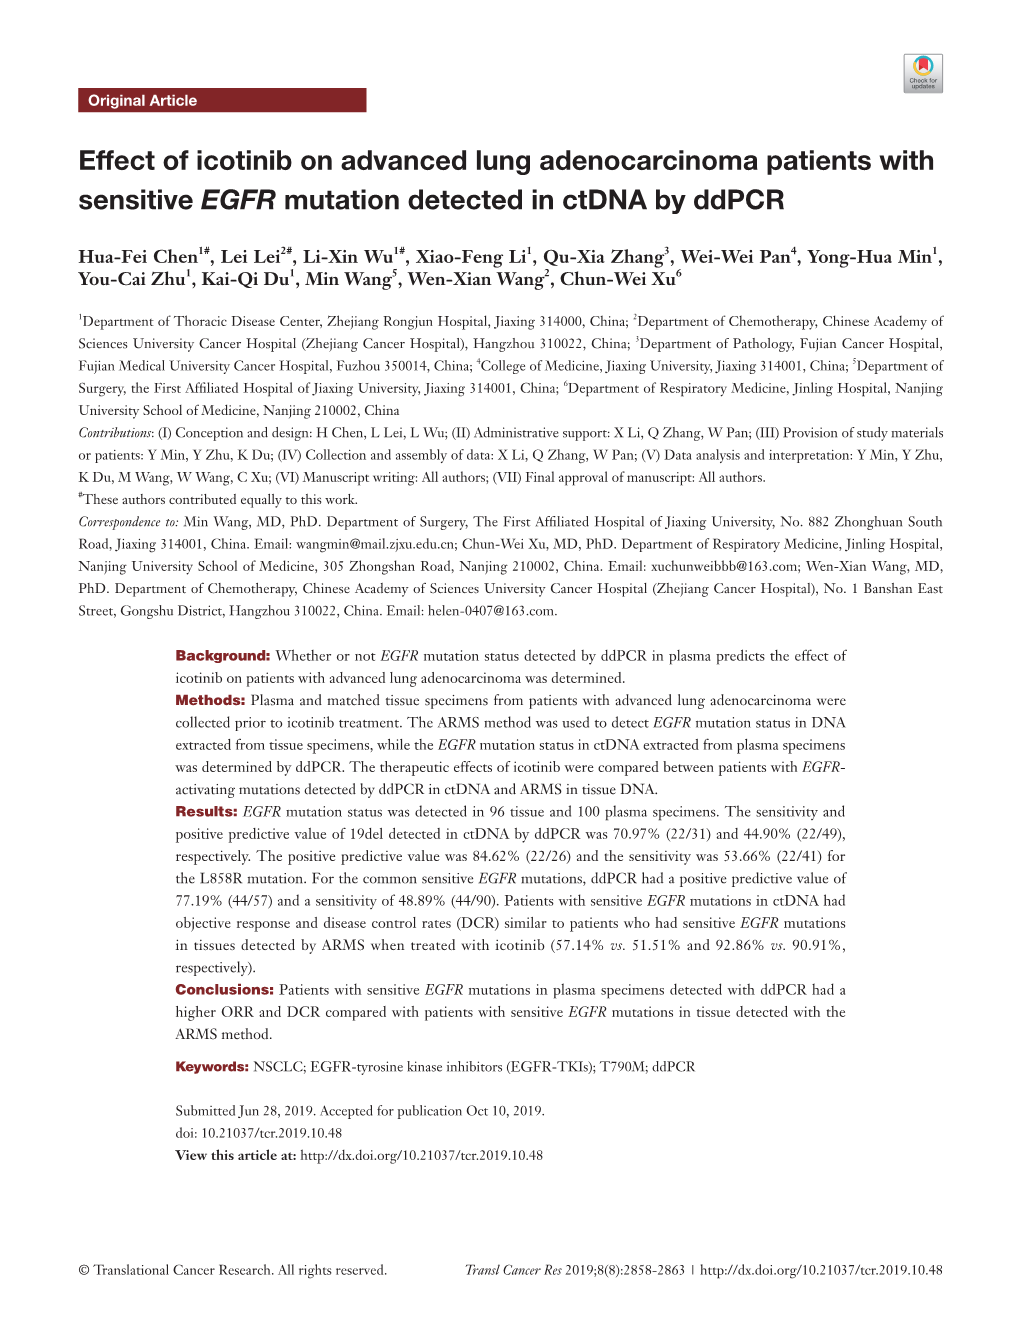 Effect of Icotinib on Advanced Lung Adenocarcinoma Patients with Sensitive EGFR Mutation Detected in Ctdna by Ddpcr